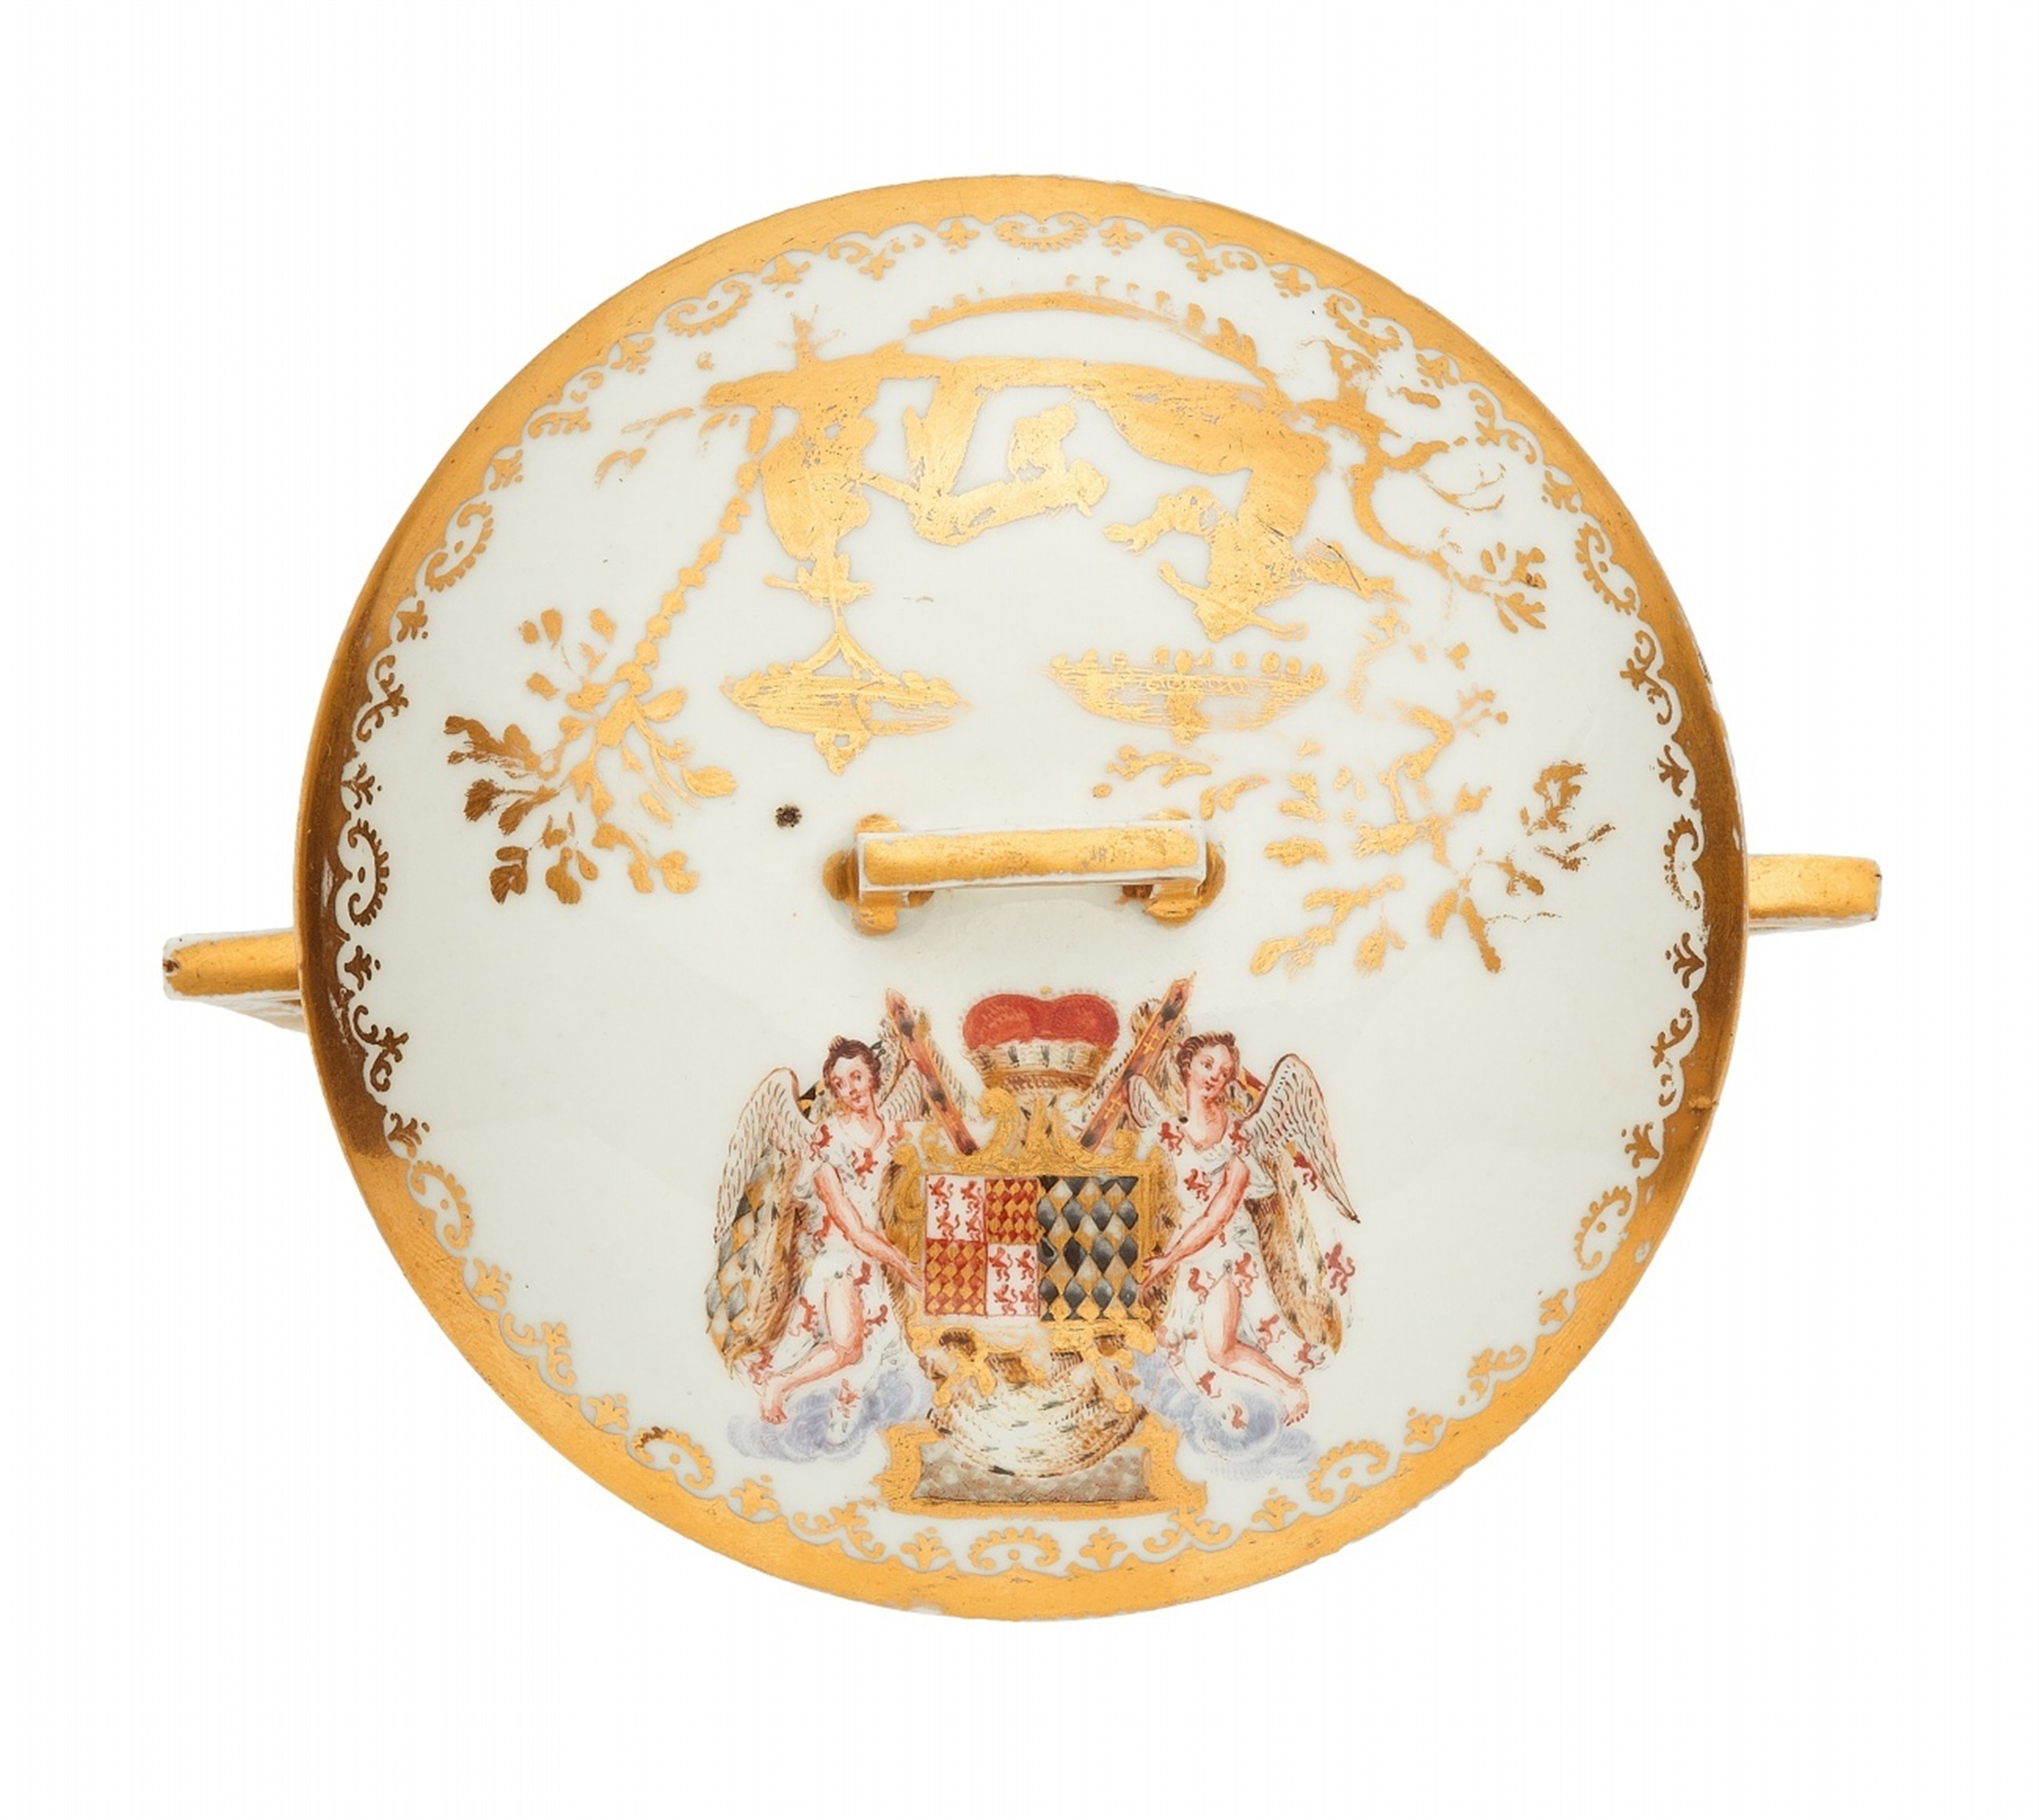 A rare Meissen Böttger porcelain ecuelle with the coat of arms of Beauvau-Craon/Ligniville - Image 4 of 4